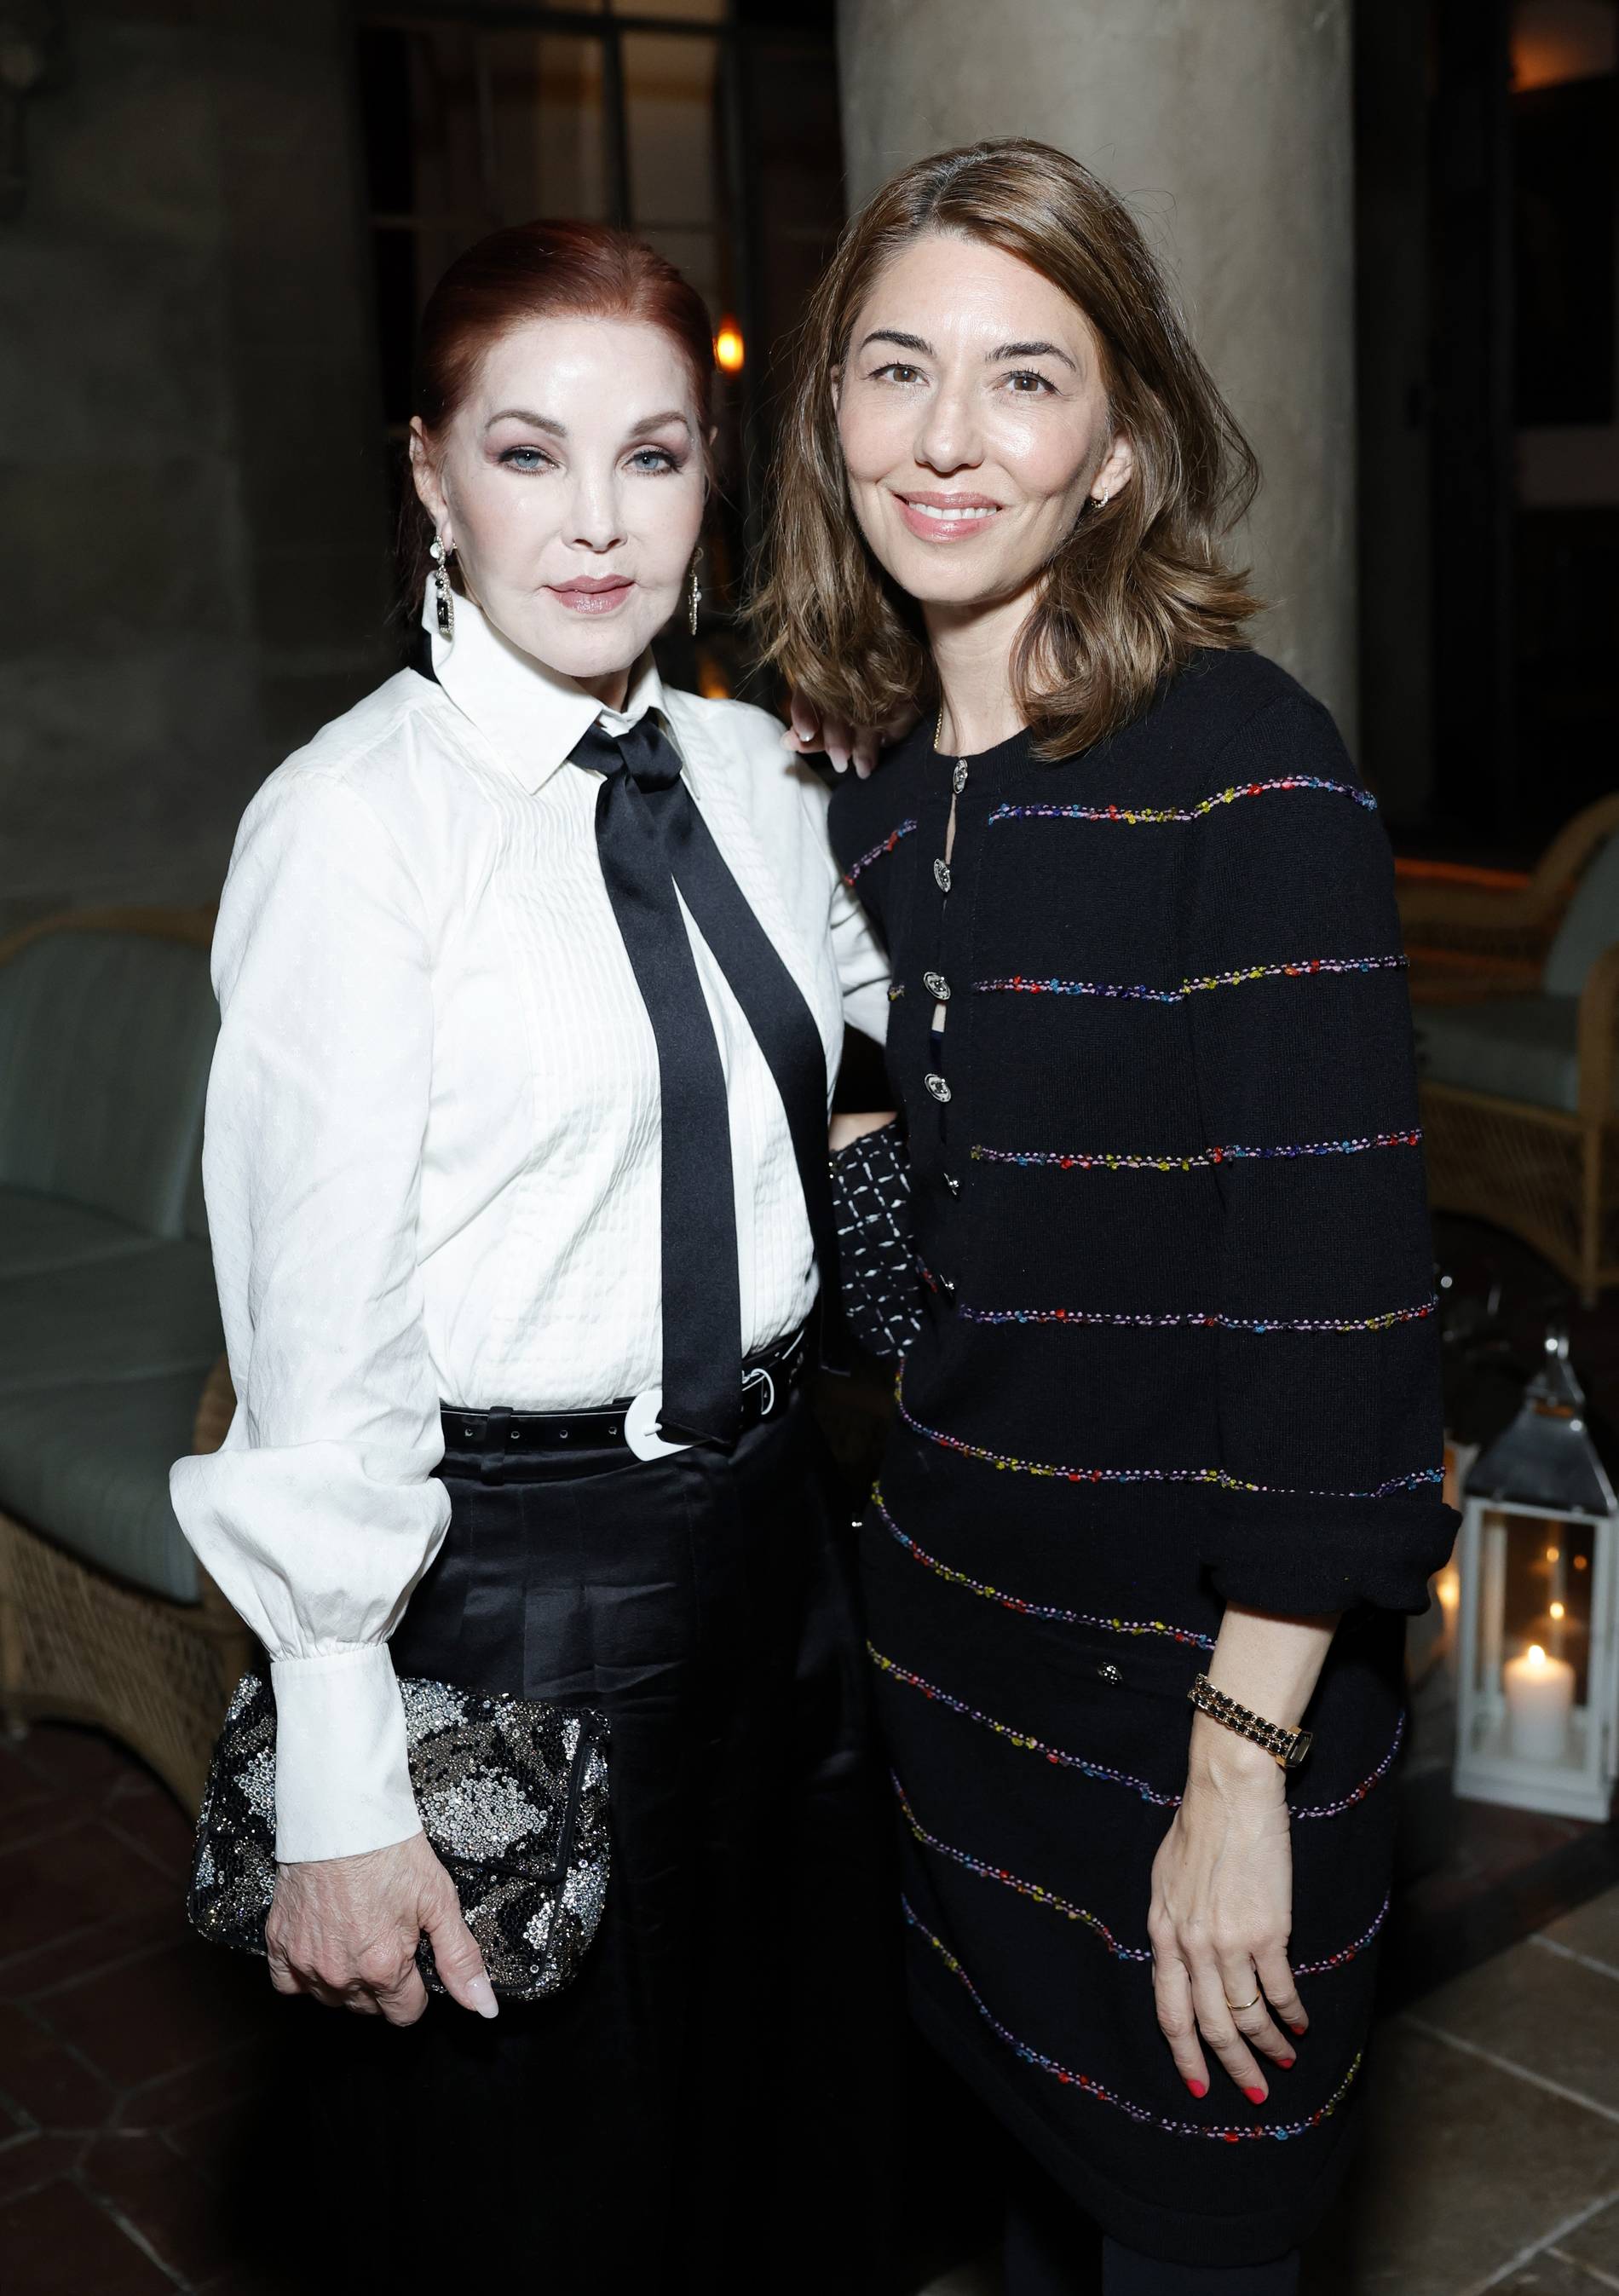 Inside the CHANEL x Sofia Coppola Dinner Party